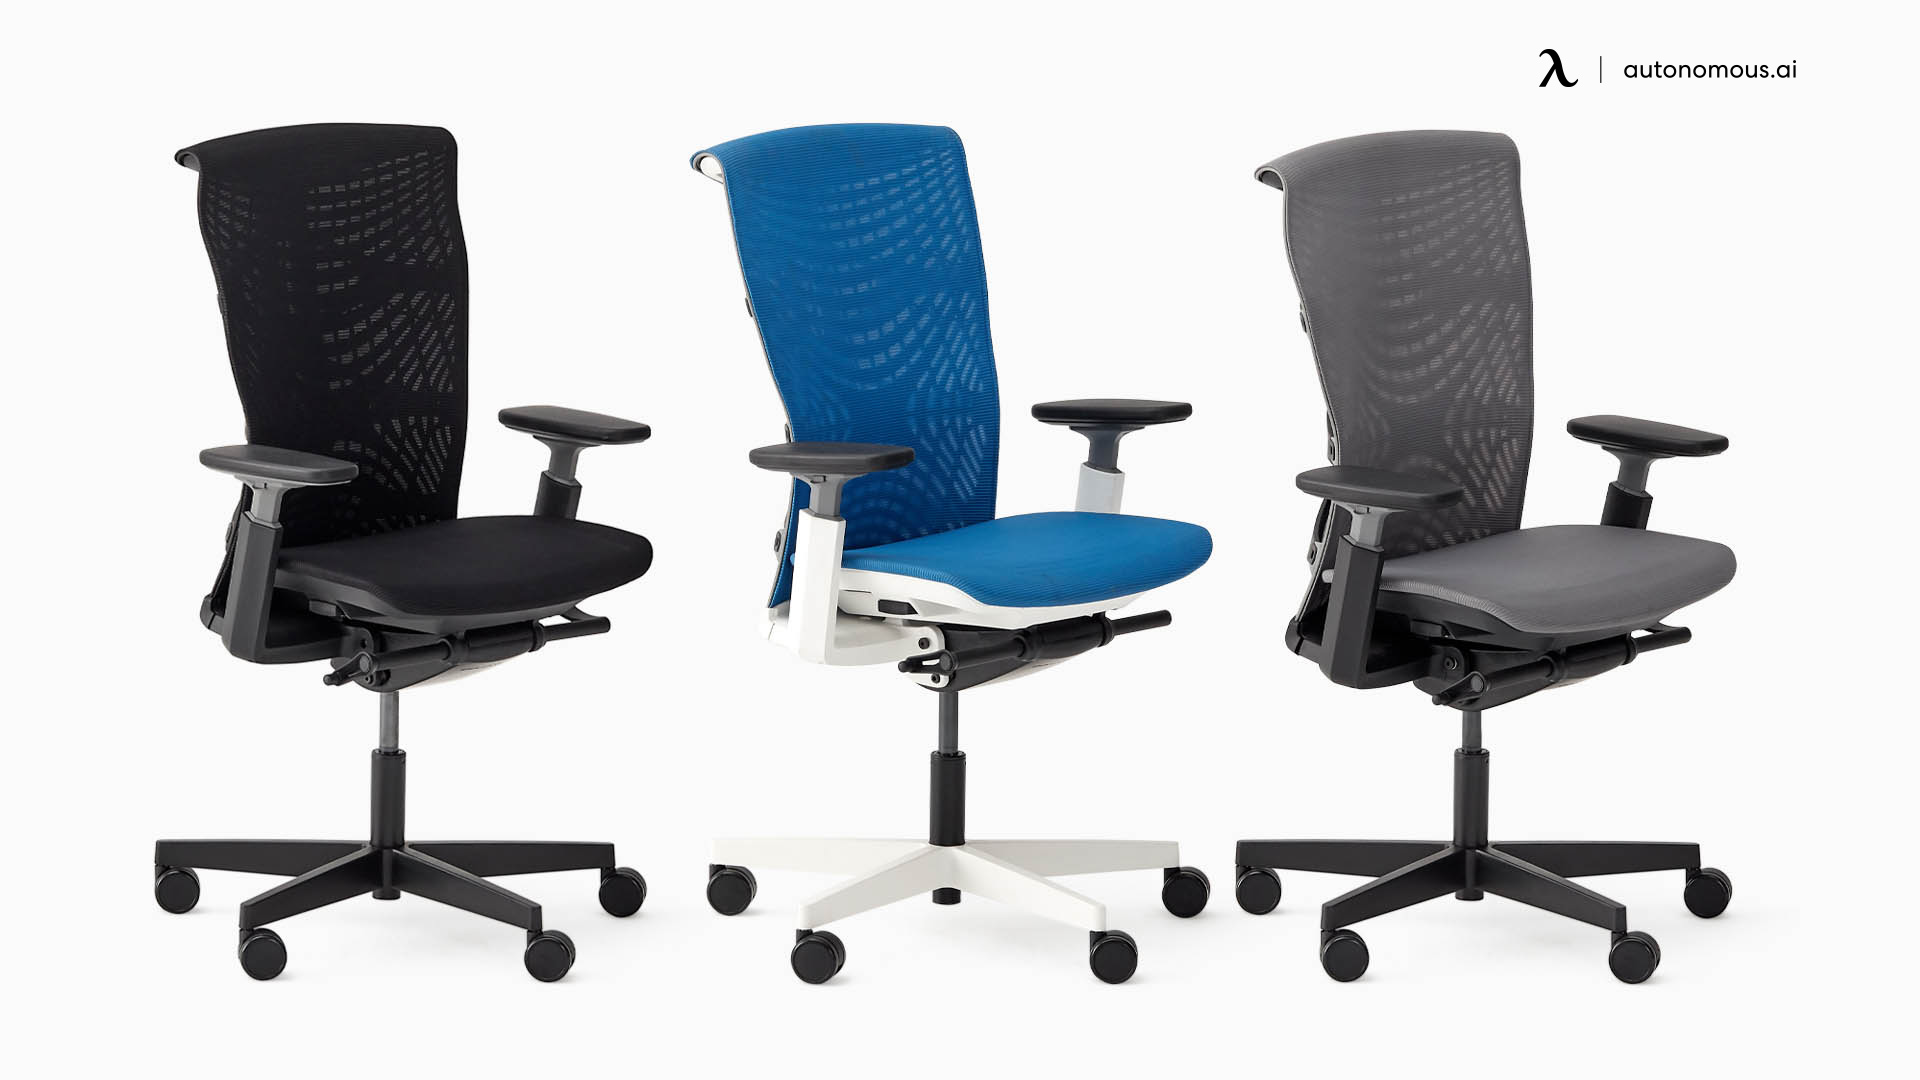 ErgoChair Pro+ colored desk chairs